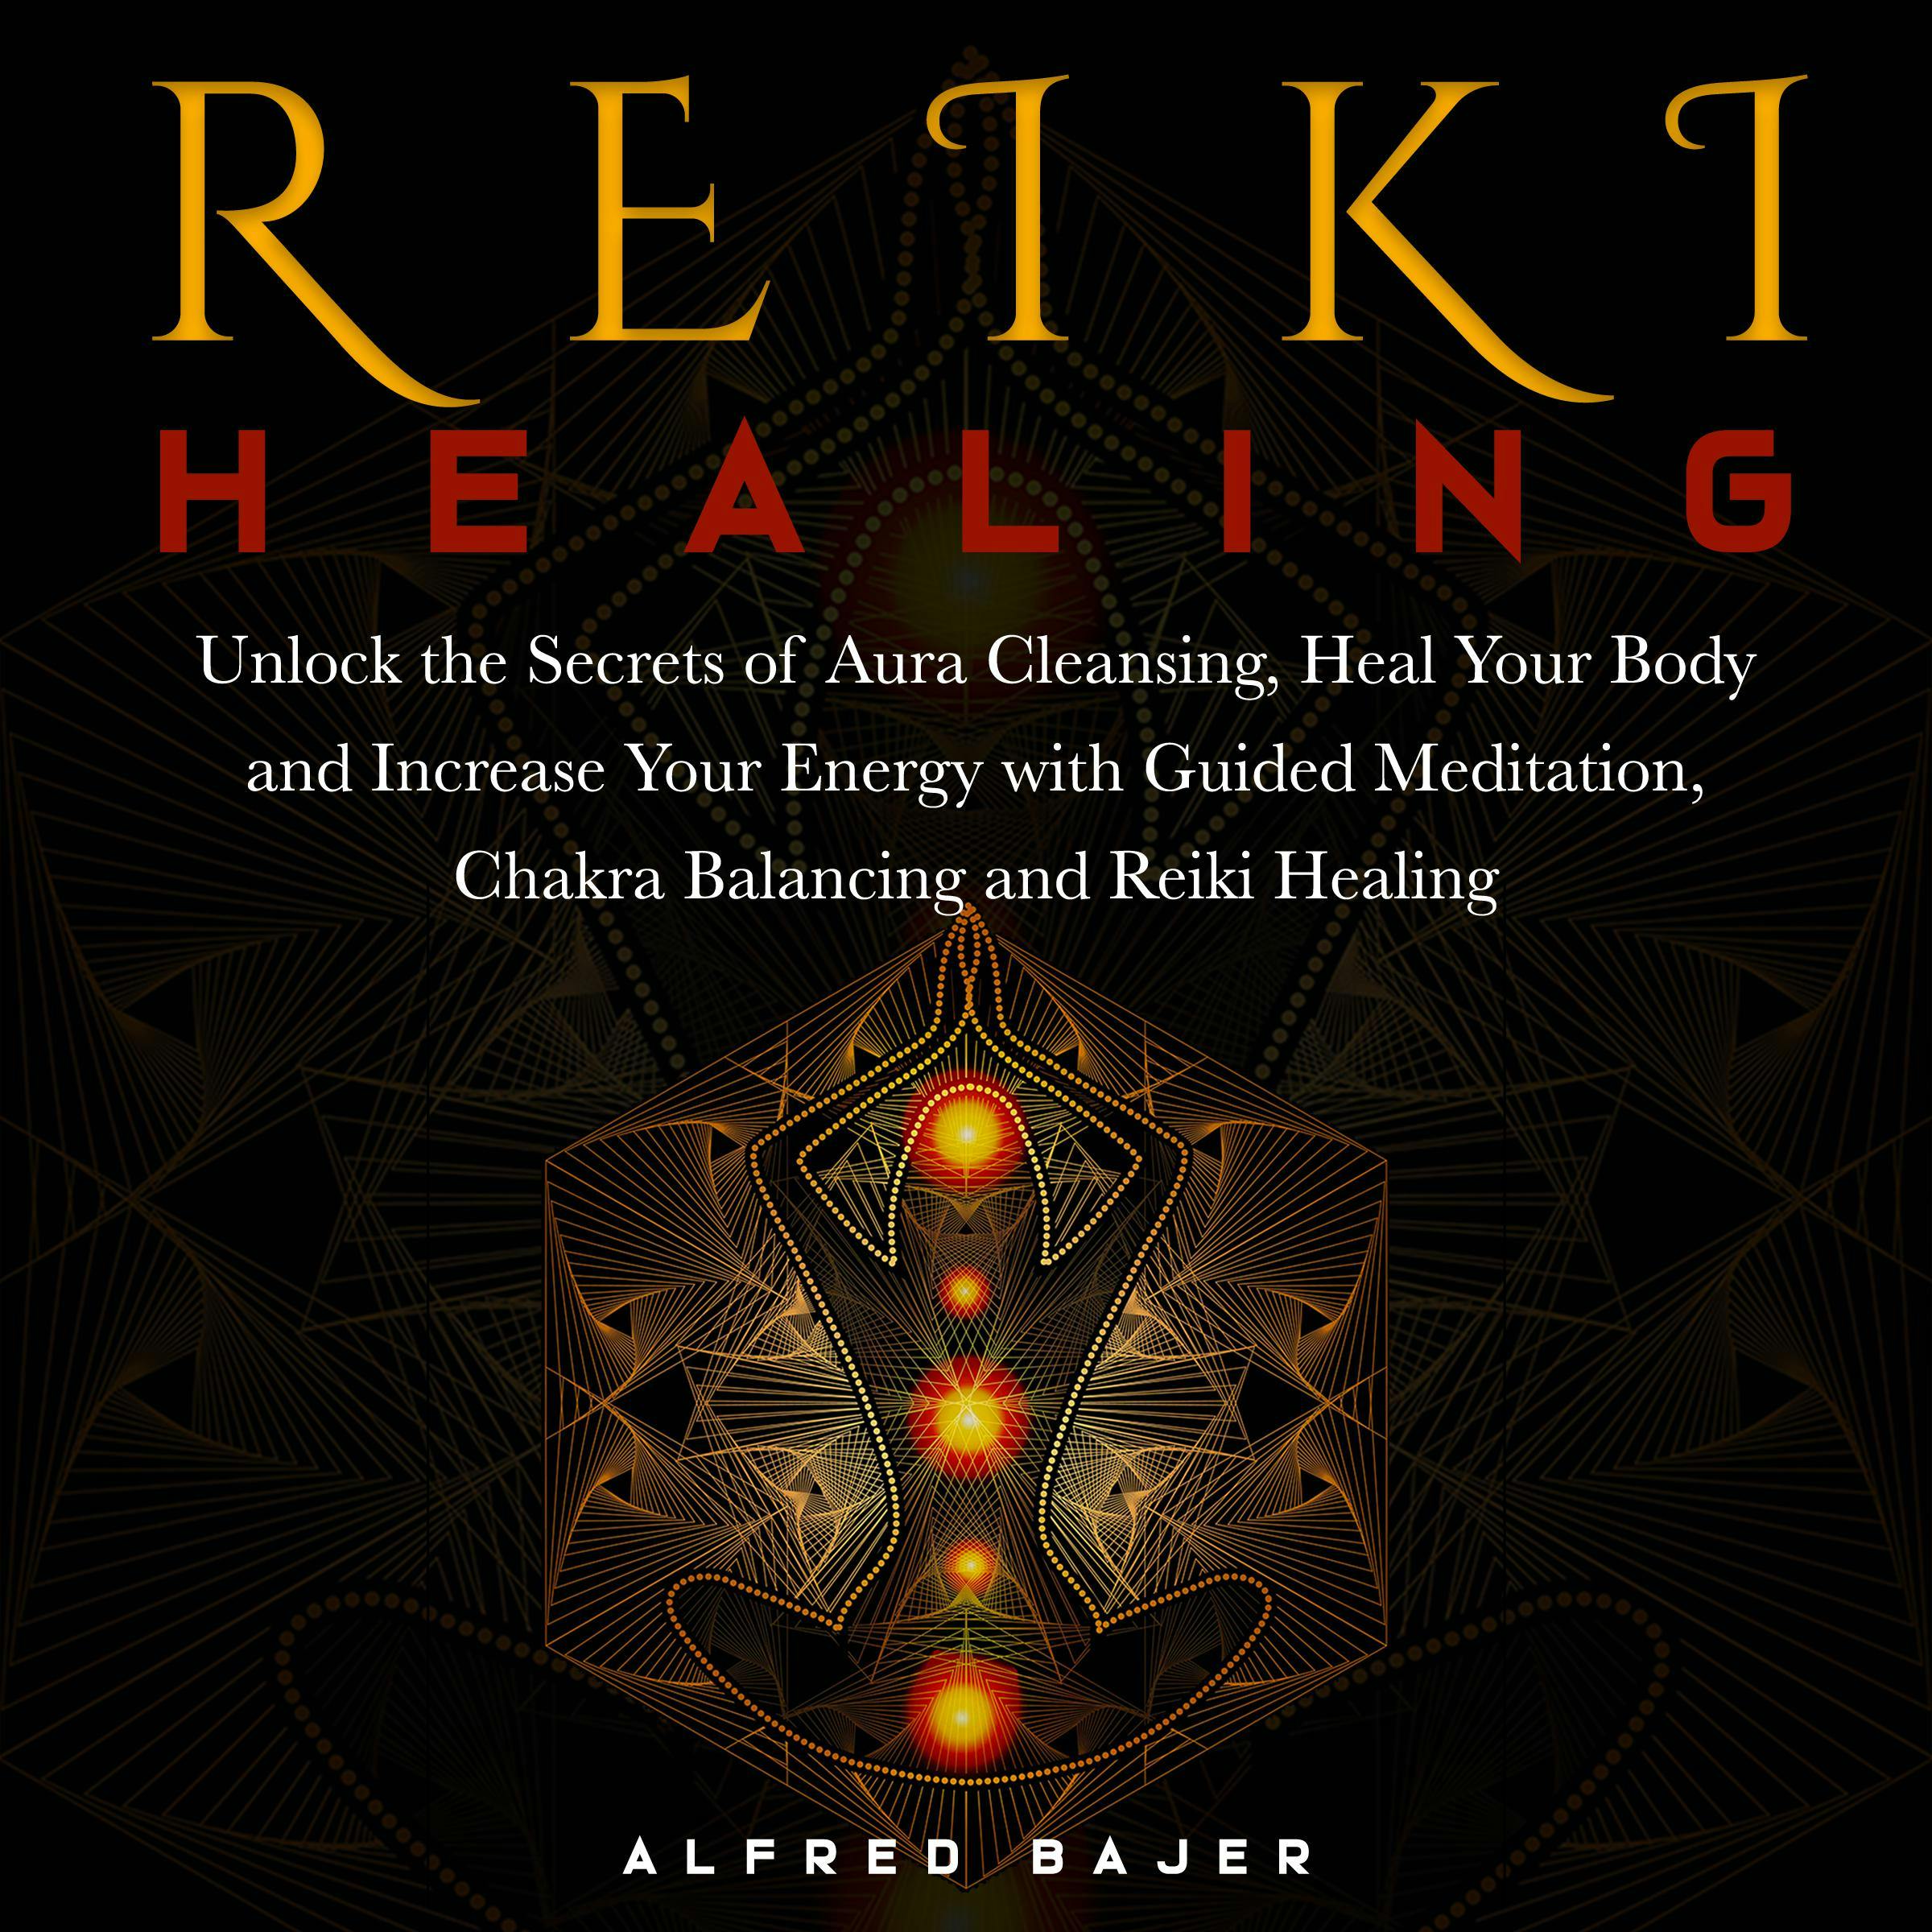 Reiki Healing: Unlock the Secrets of Aura Cleansing, Heal Your Body and Increase Your Energy with Guided Meditation, Chakra Balancing and Reiki Healing - undefined